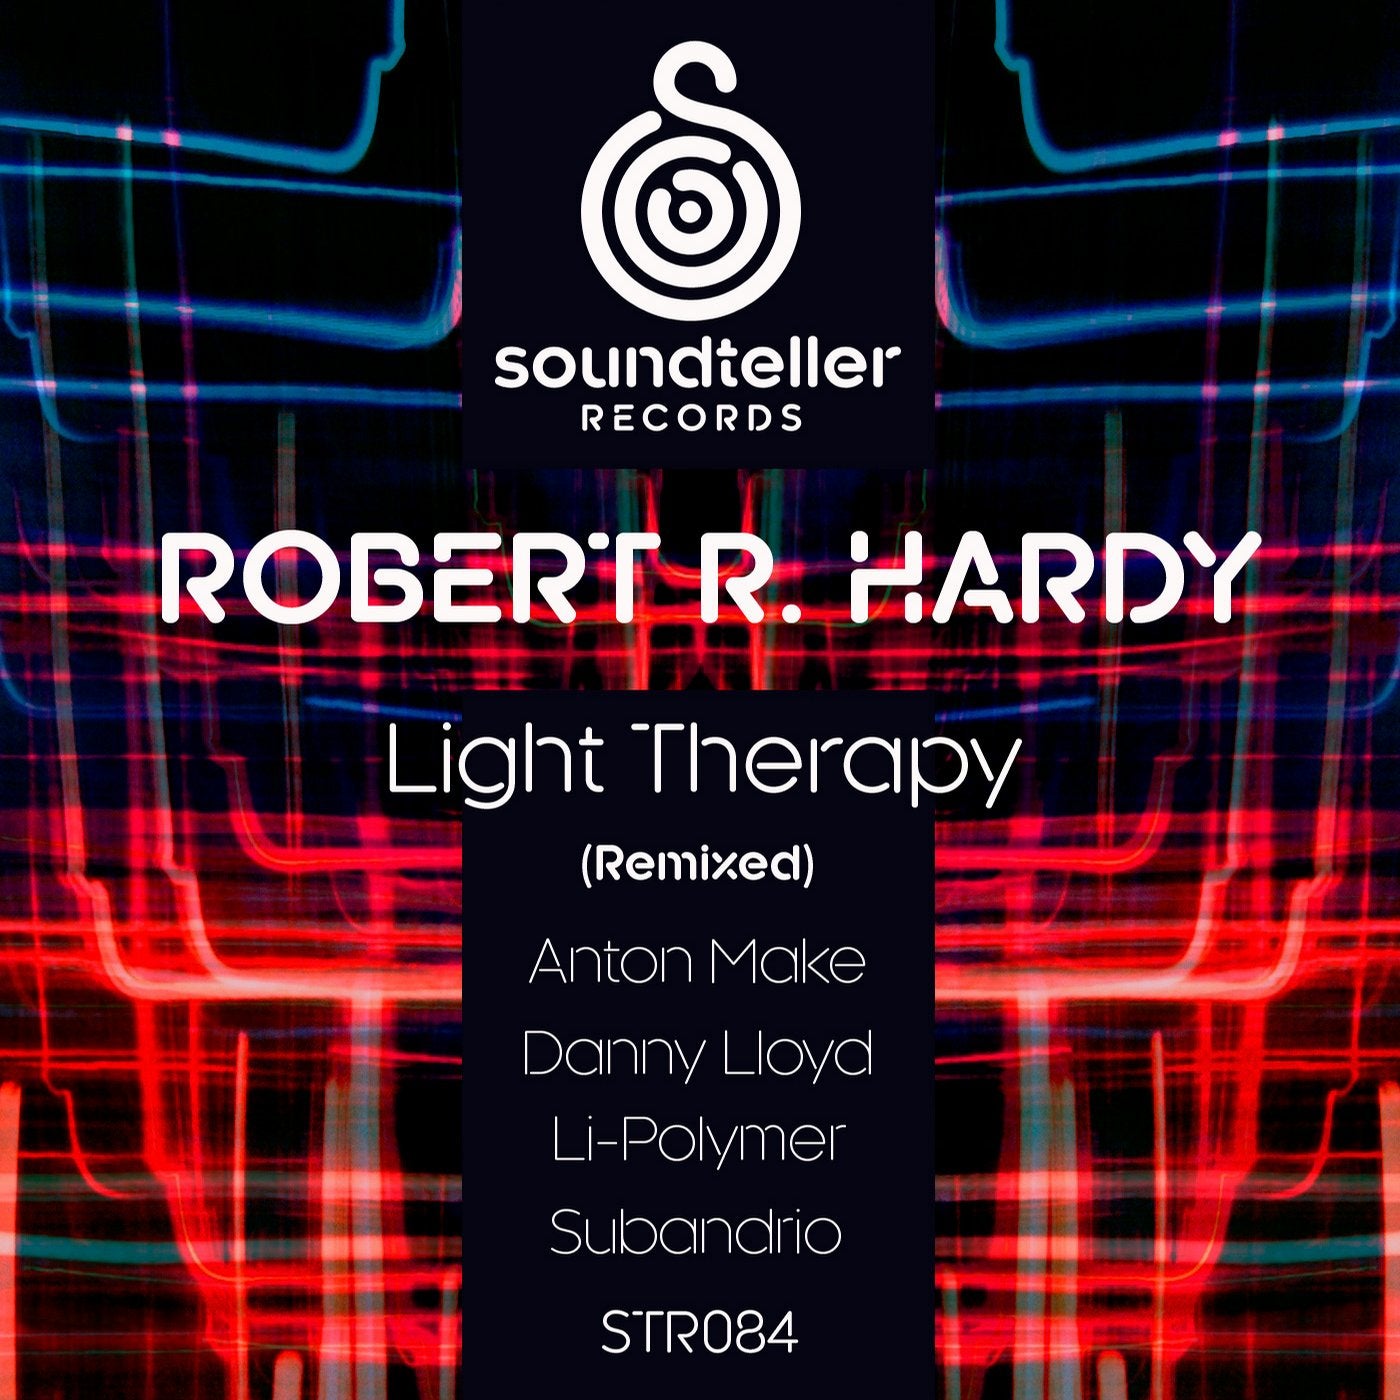 Light Therapy (Remixed)